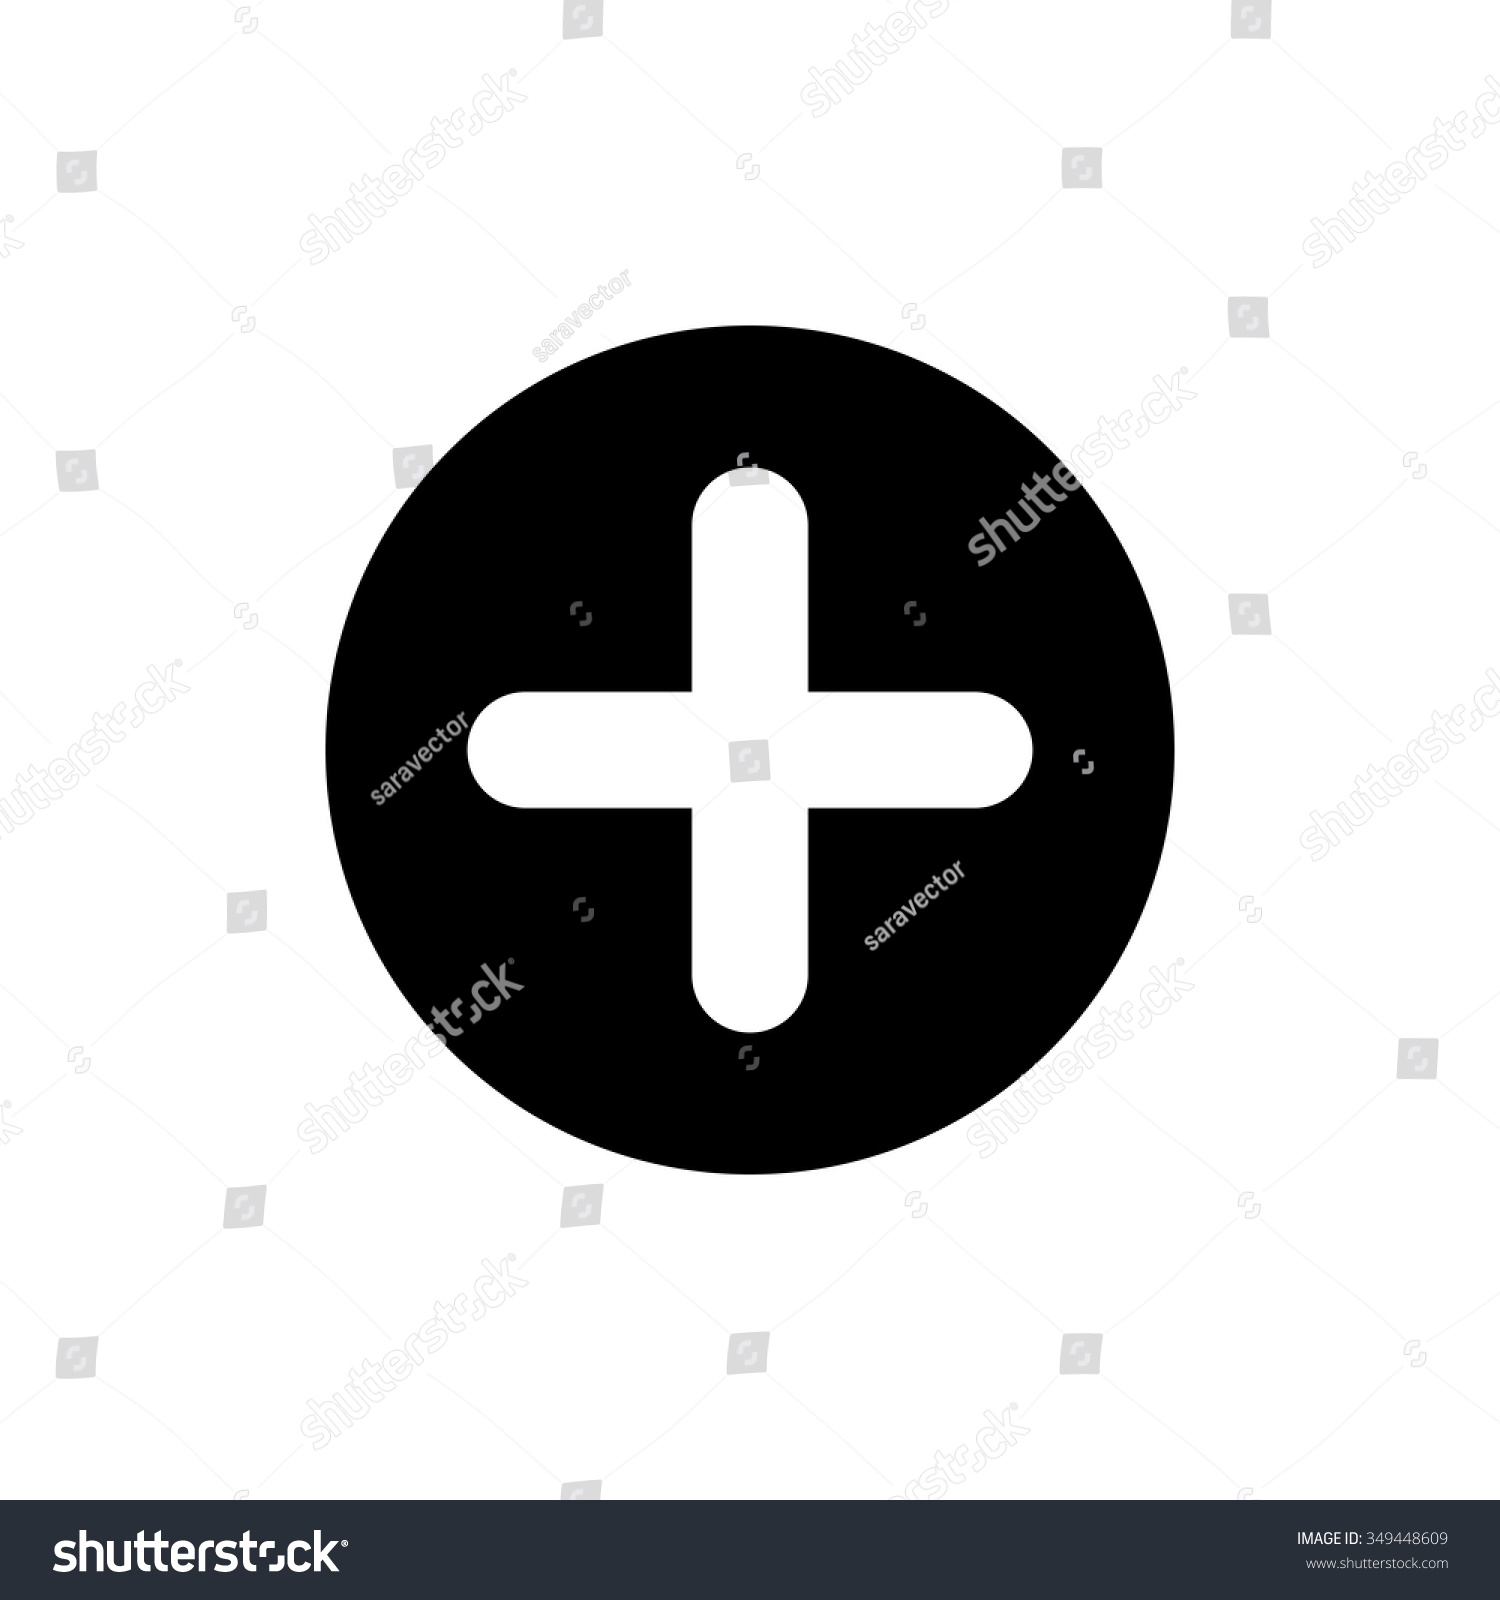 Add Sign Stock Vector (Royalty Free) 349448609 | Shutterstock